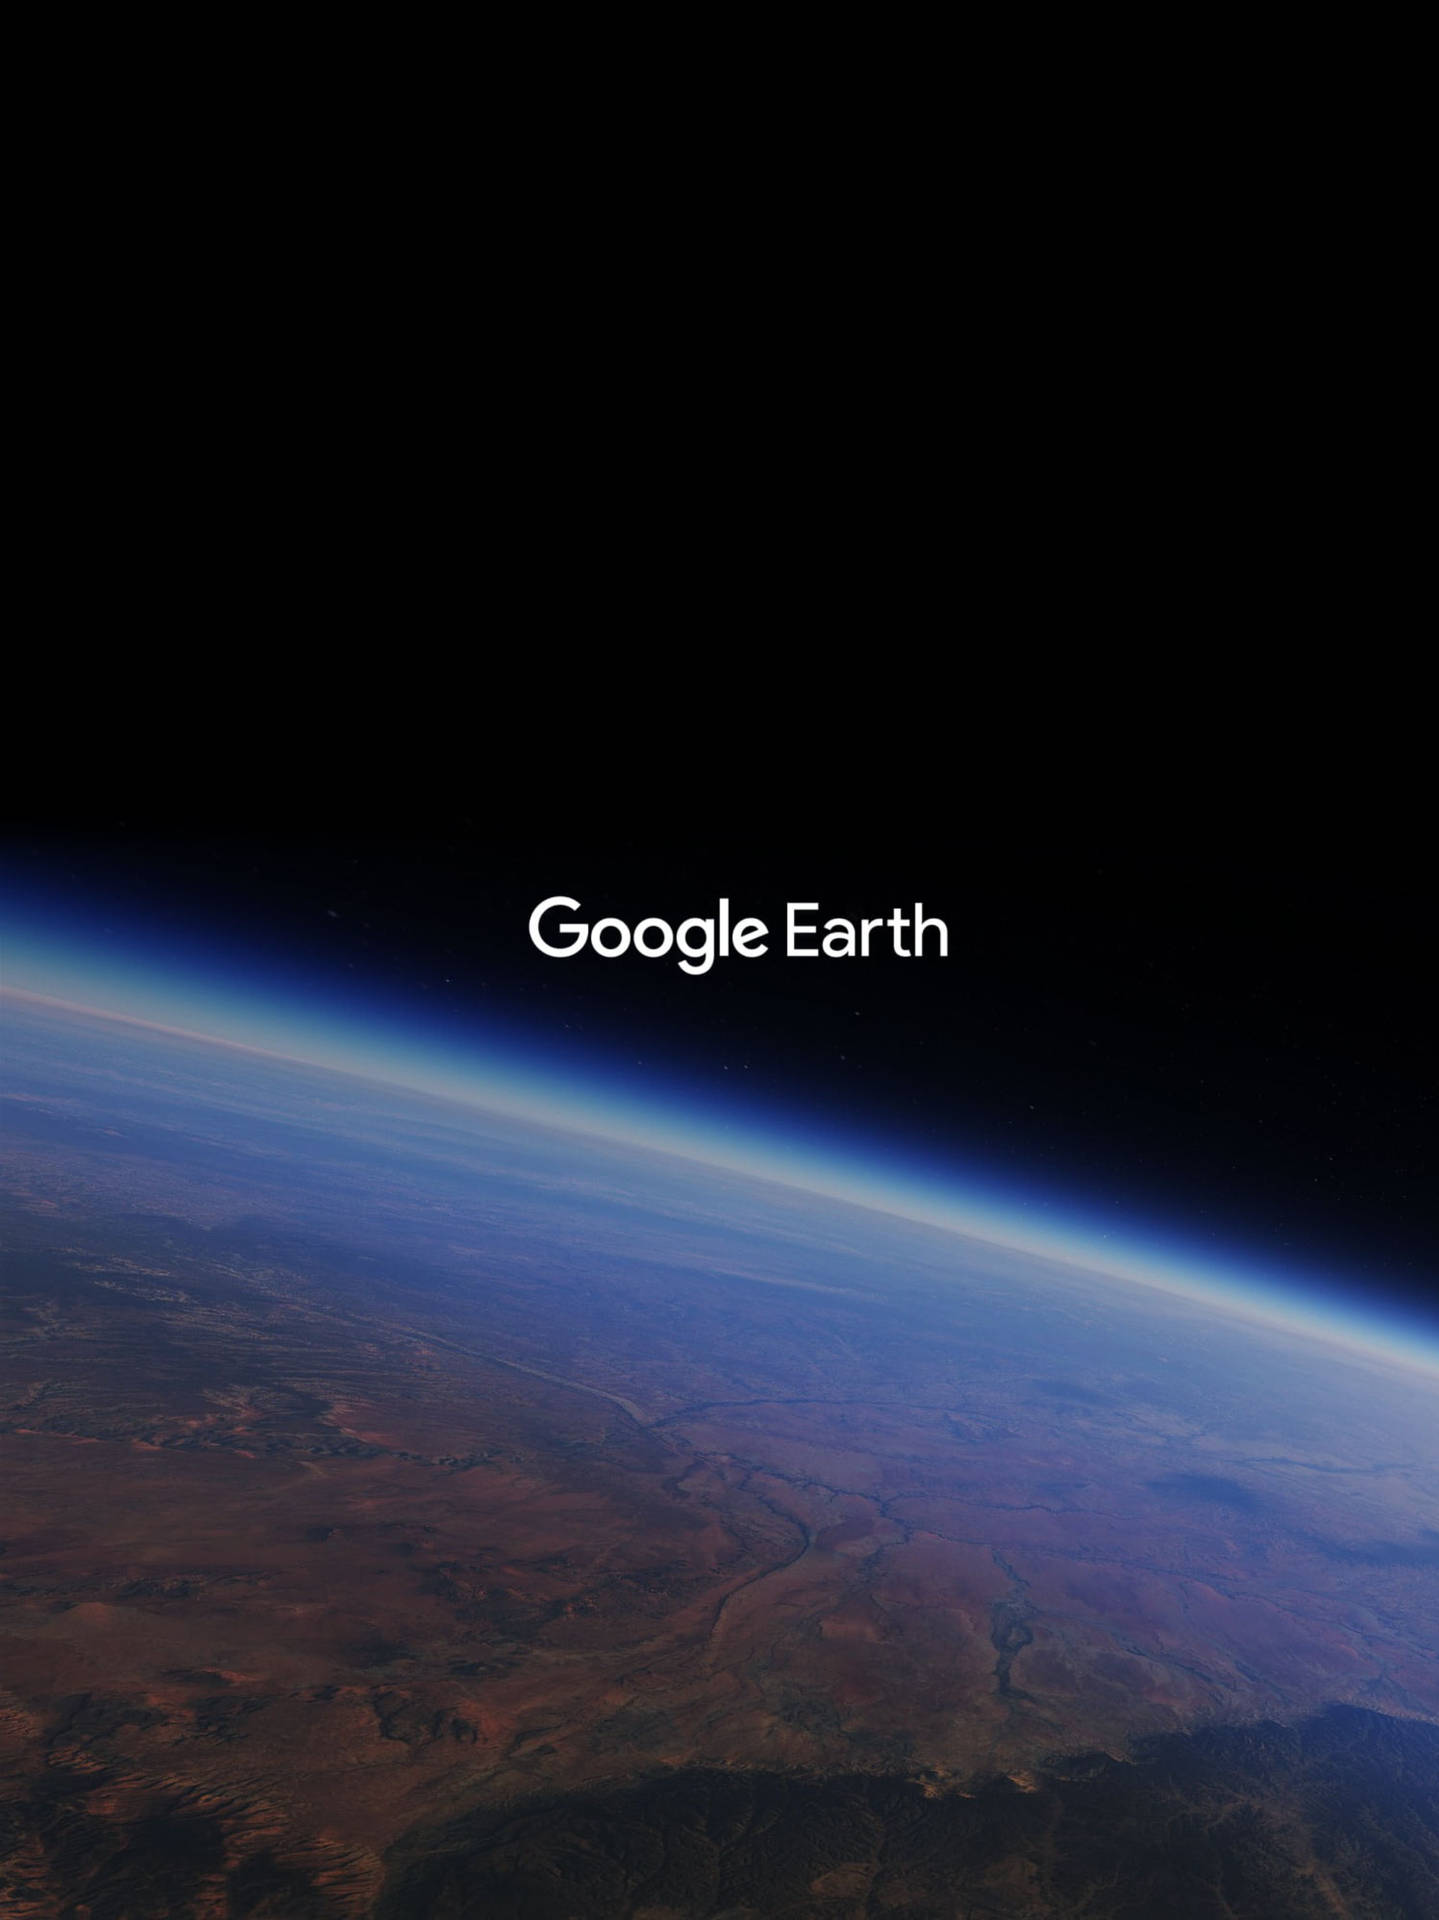 Google Earth In Outer Space Background